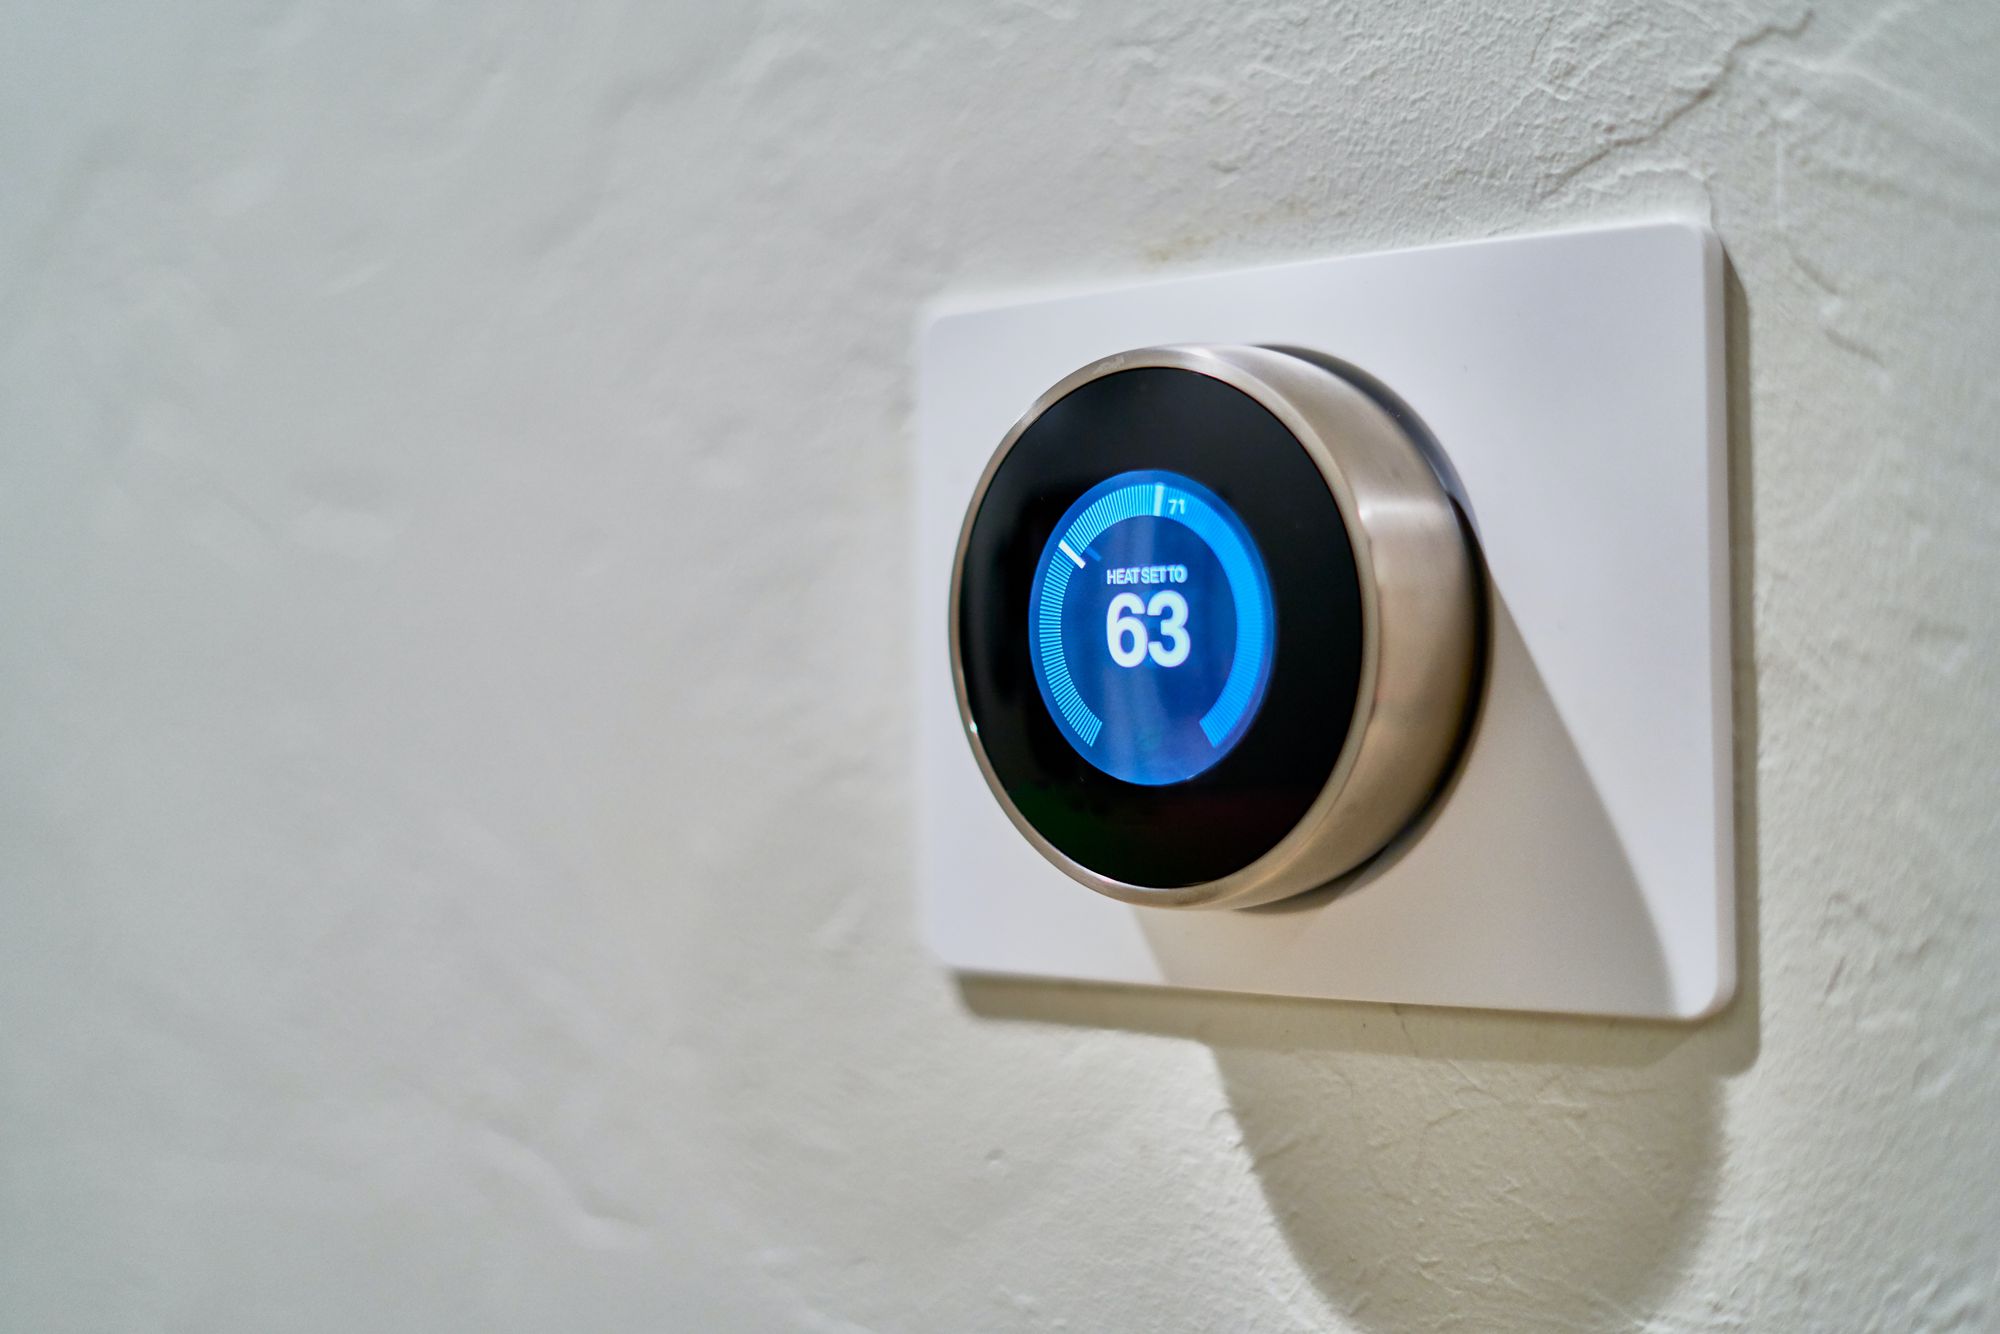 Example of a smart home device where you can control the temperature. 